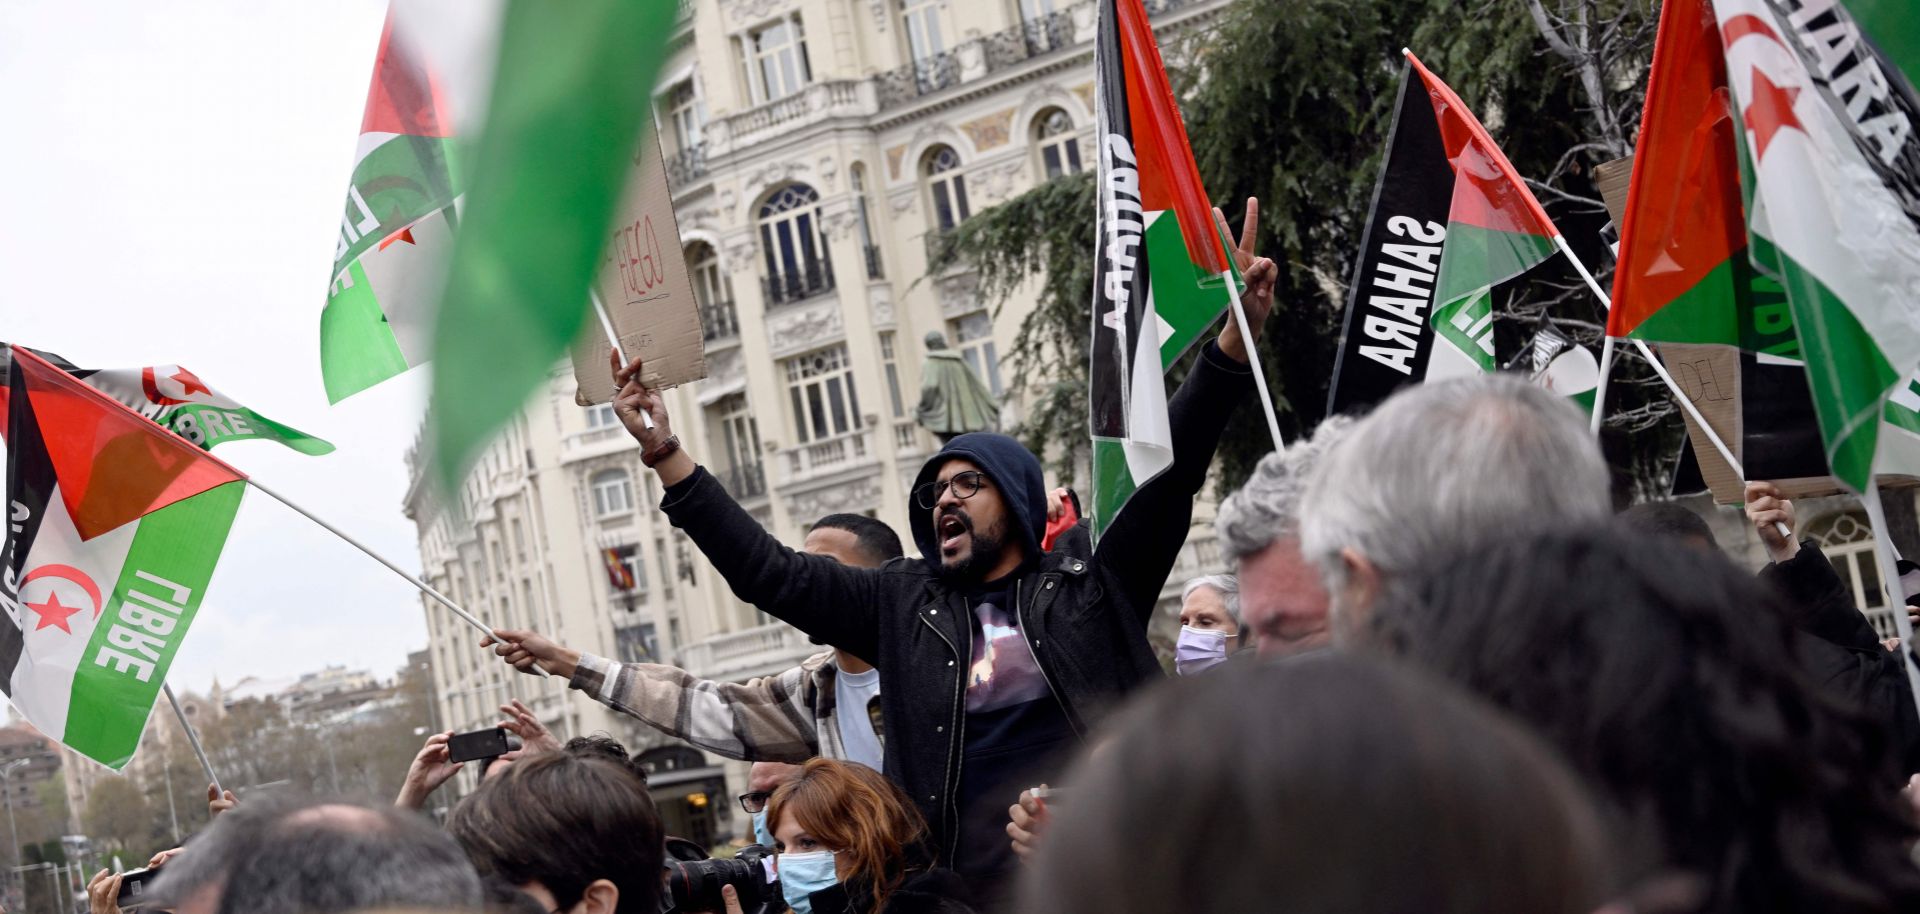 People take part in a ''Free Sahara'' rally in Madrid, Spain, on March 30, 2022, in protest of the Spanish government's recent move to recognize Morocco's autonomy plan for the disputed territory of Western Sahara. 